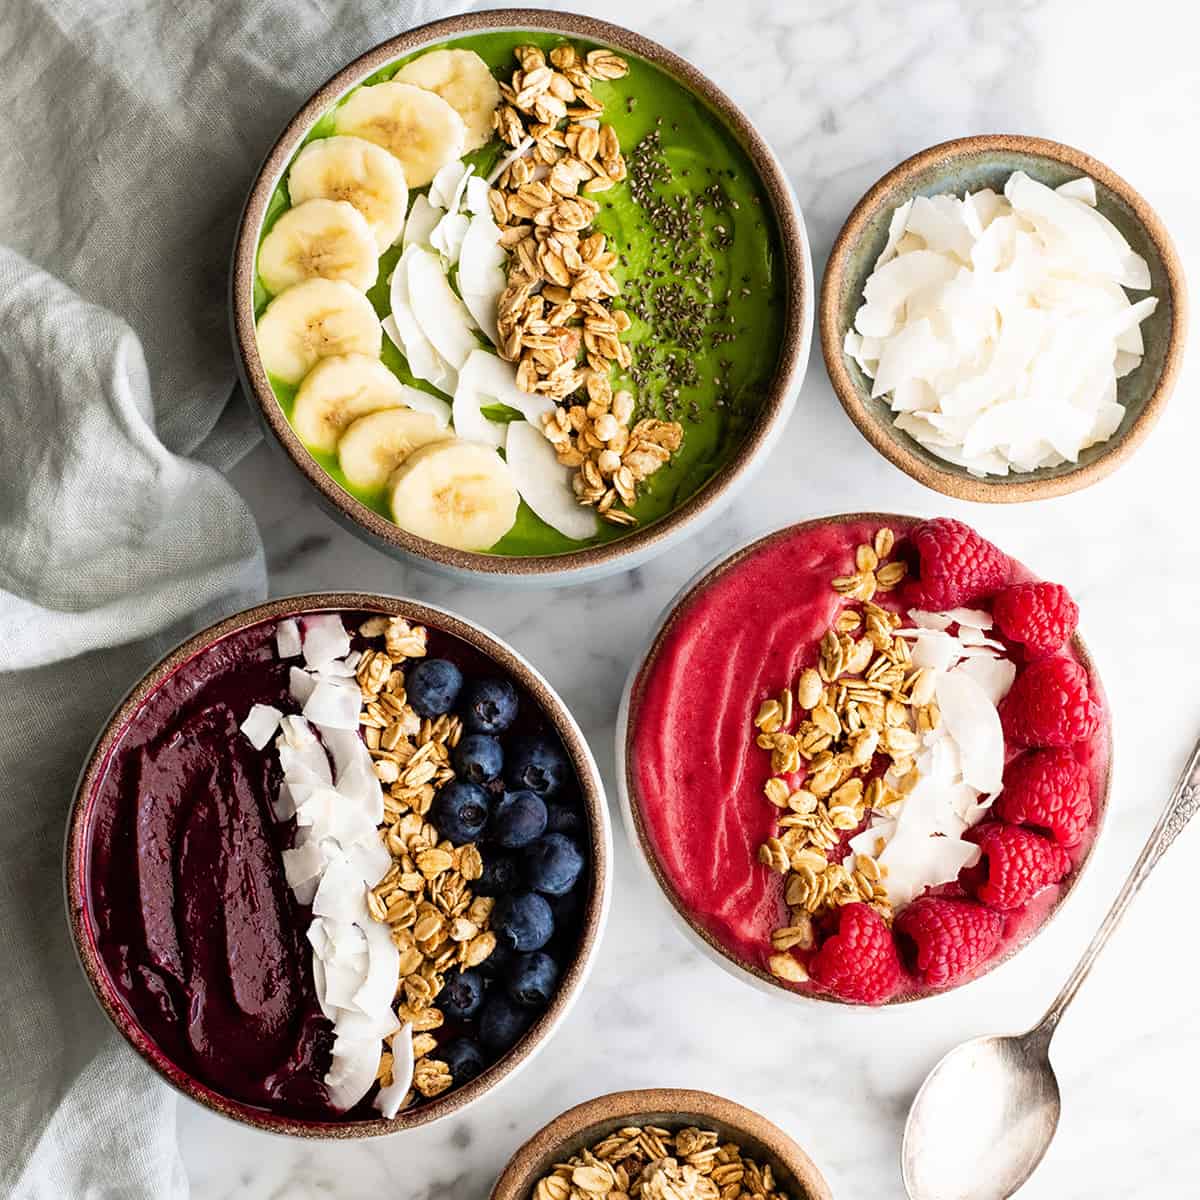 How to Make Delicious and Healthy Smoothie Bowls"